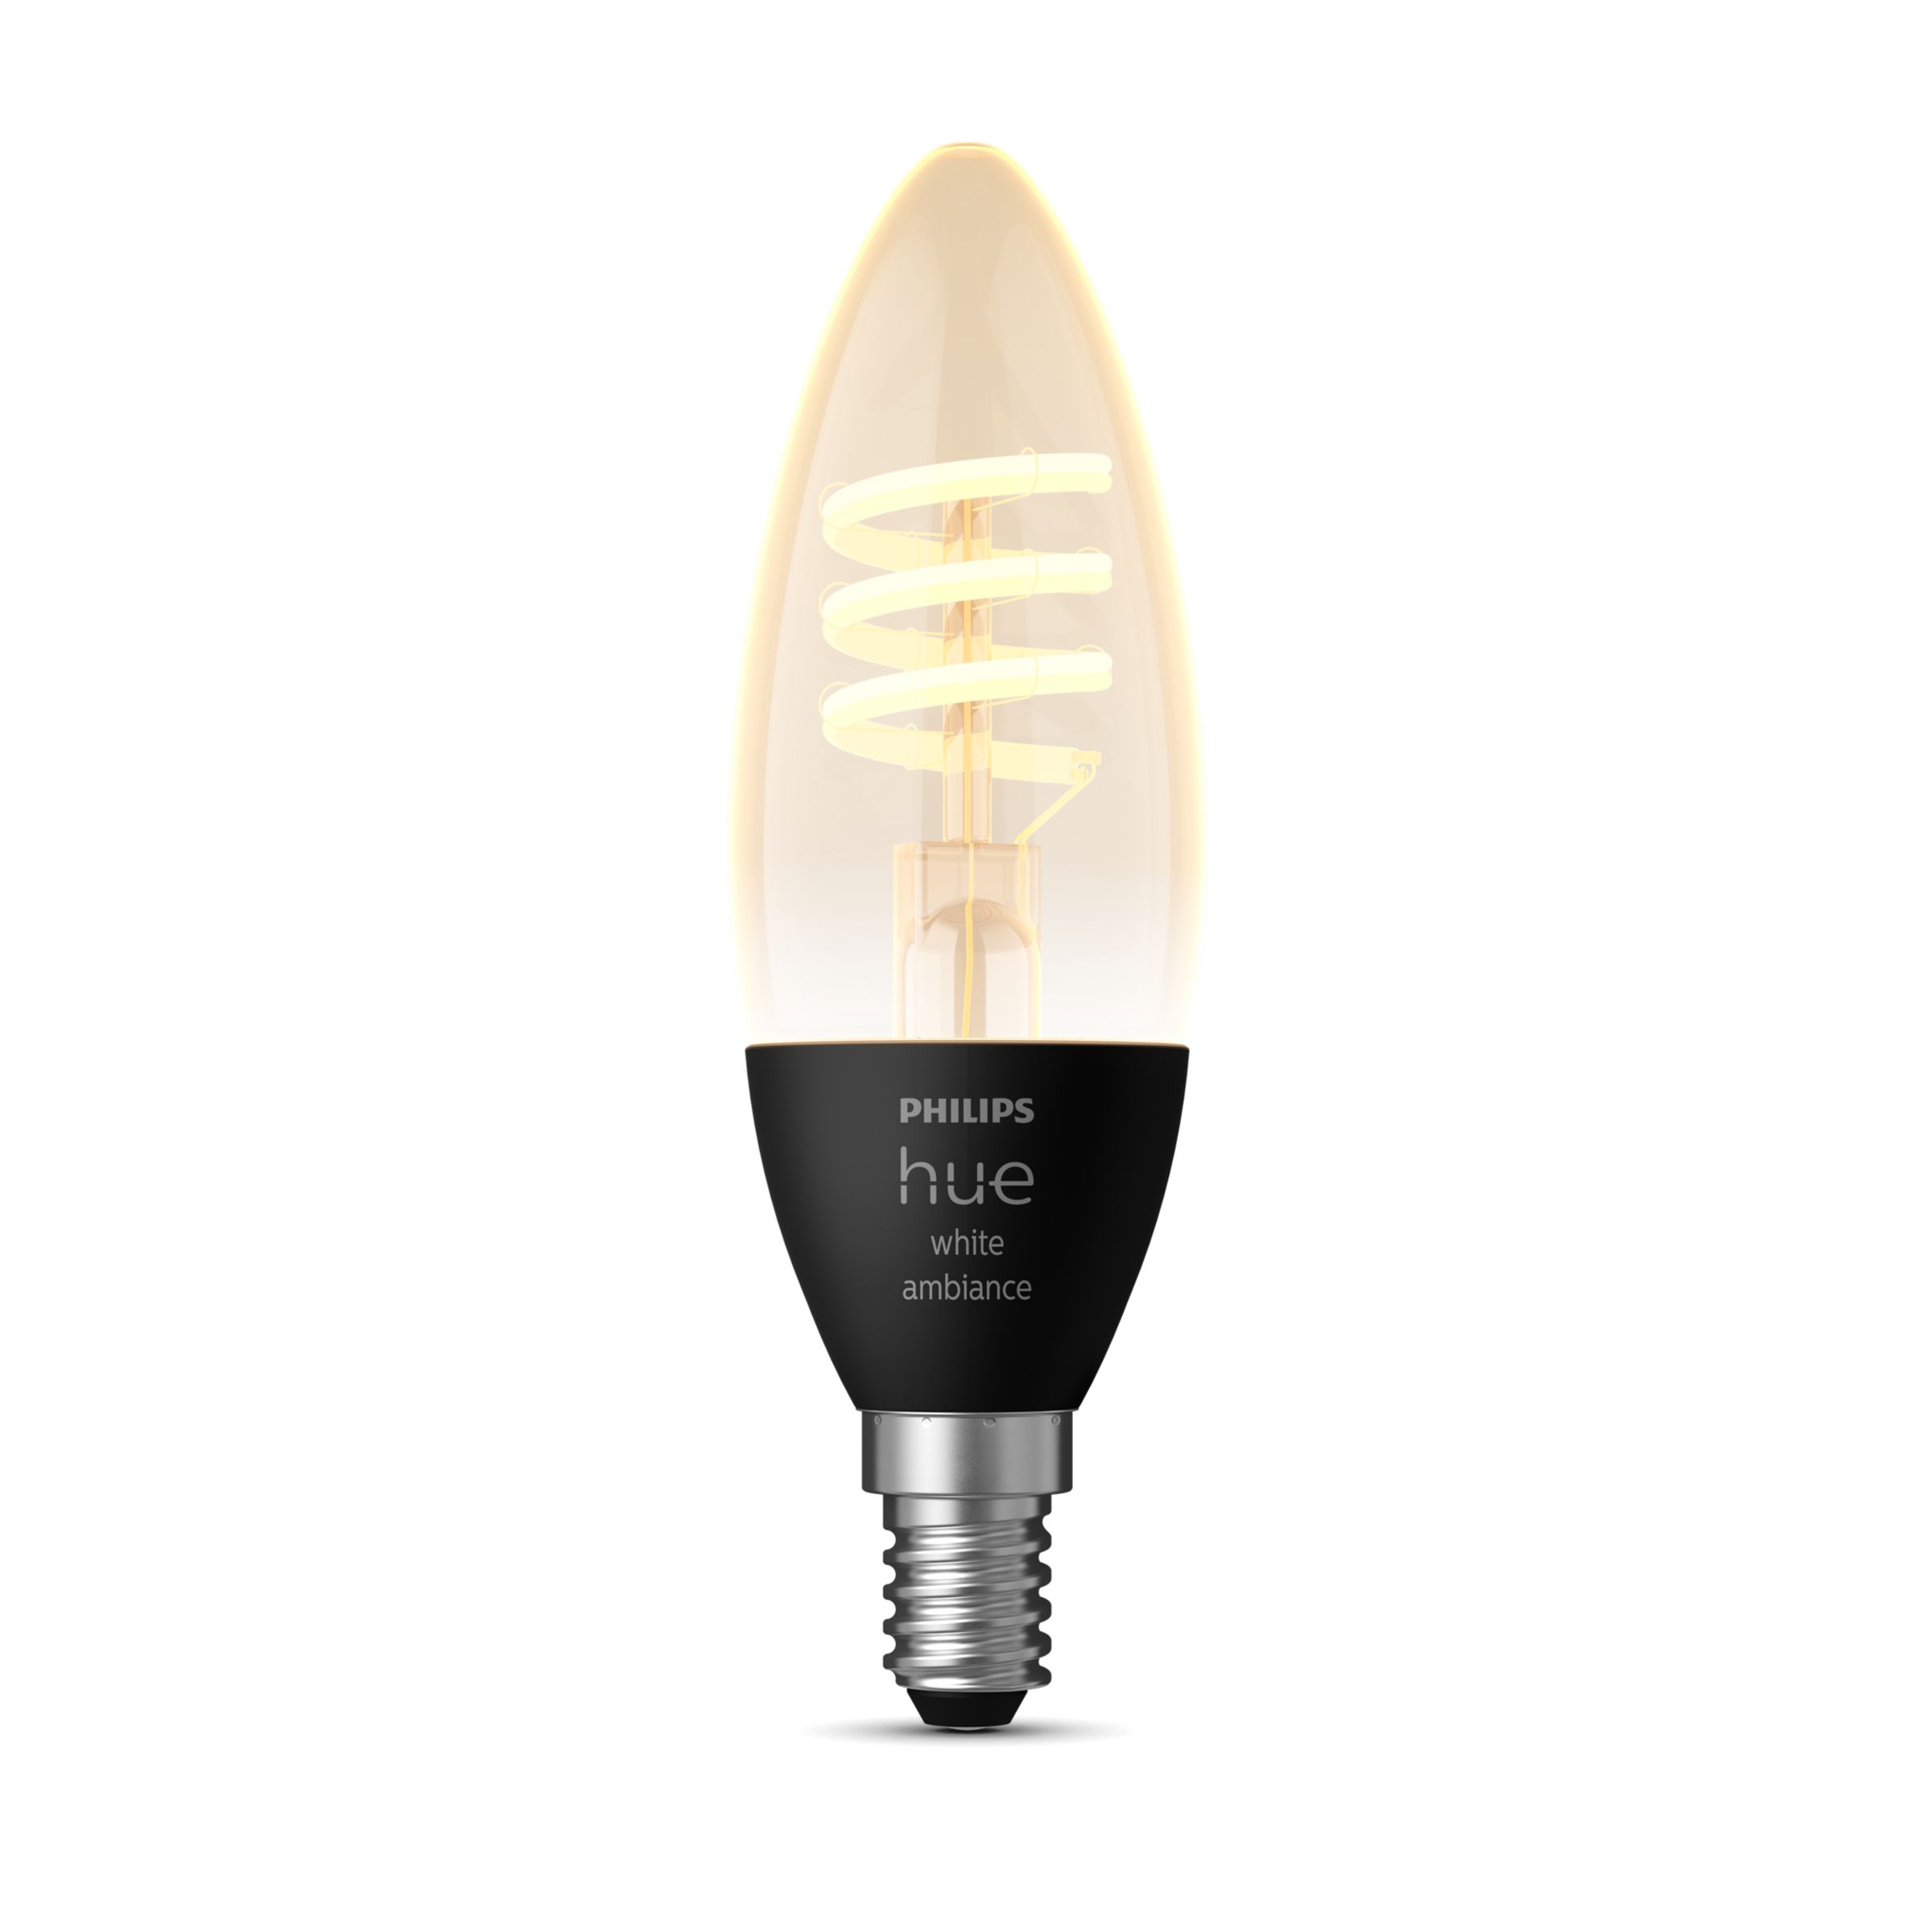 wit vitaliteit Mail Hue White ambiance filament Losse lamp E14 | Philips Hue NL